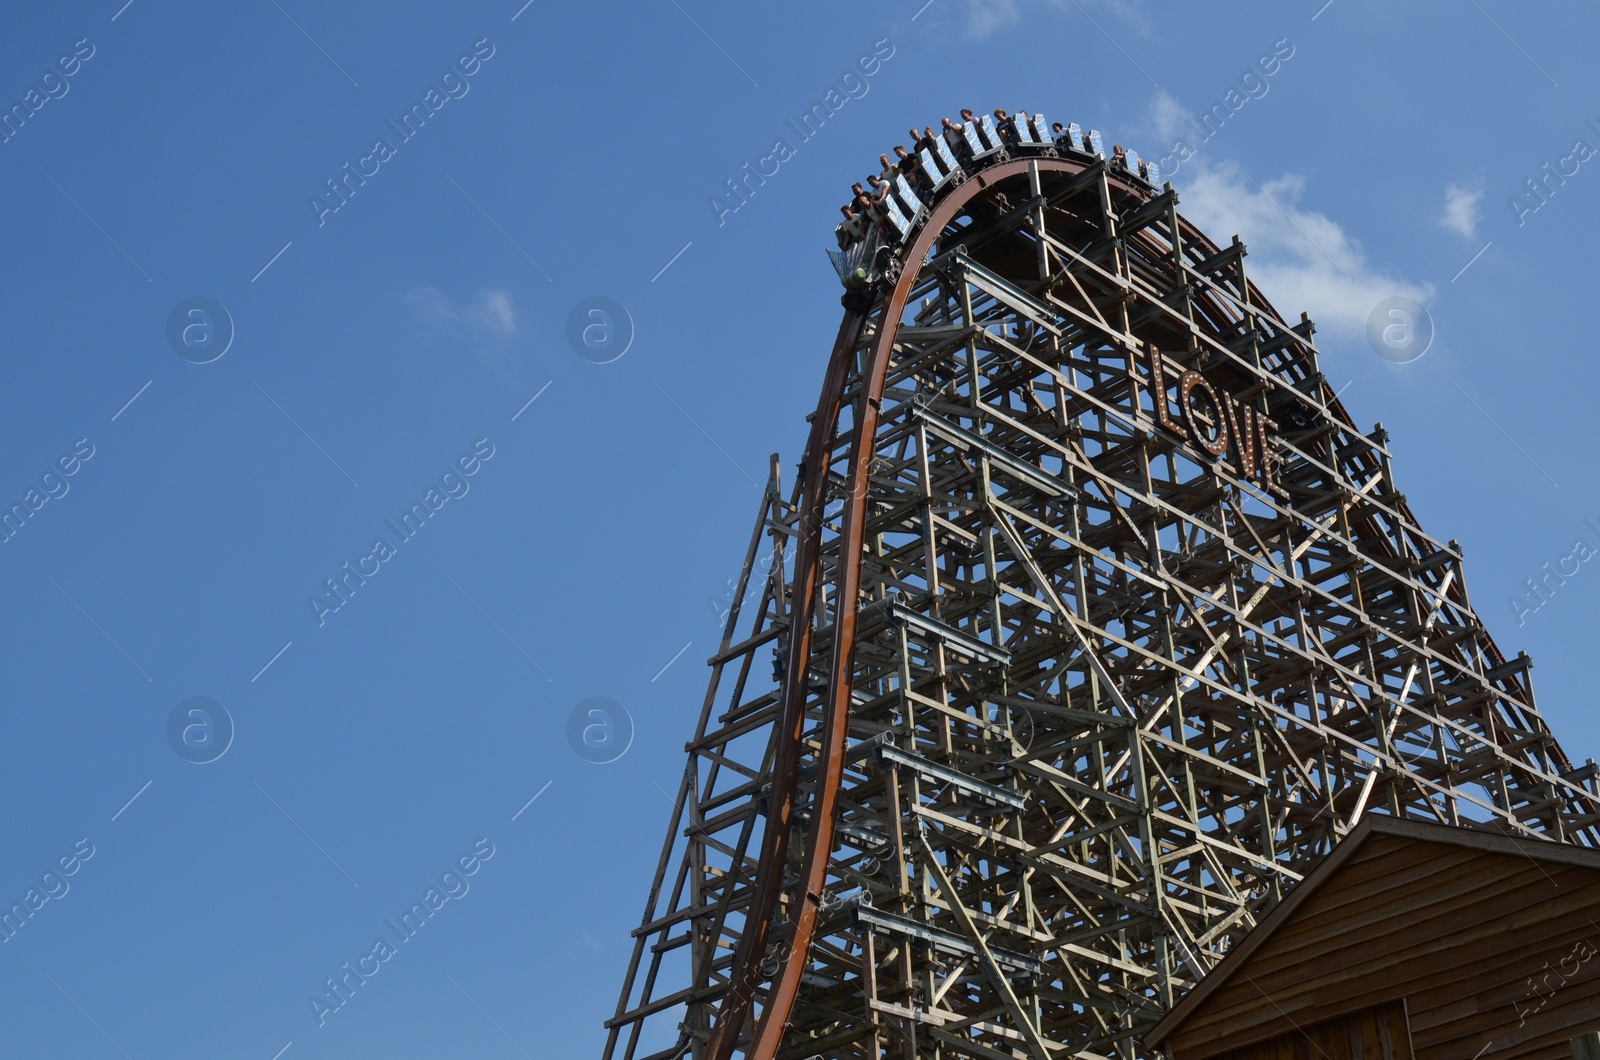 Photo of Amsterdam, The Netherlands - August 8, 2022: People riding rollercoaster in Walibi Holland amusement park, low angle view